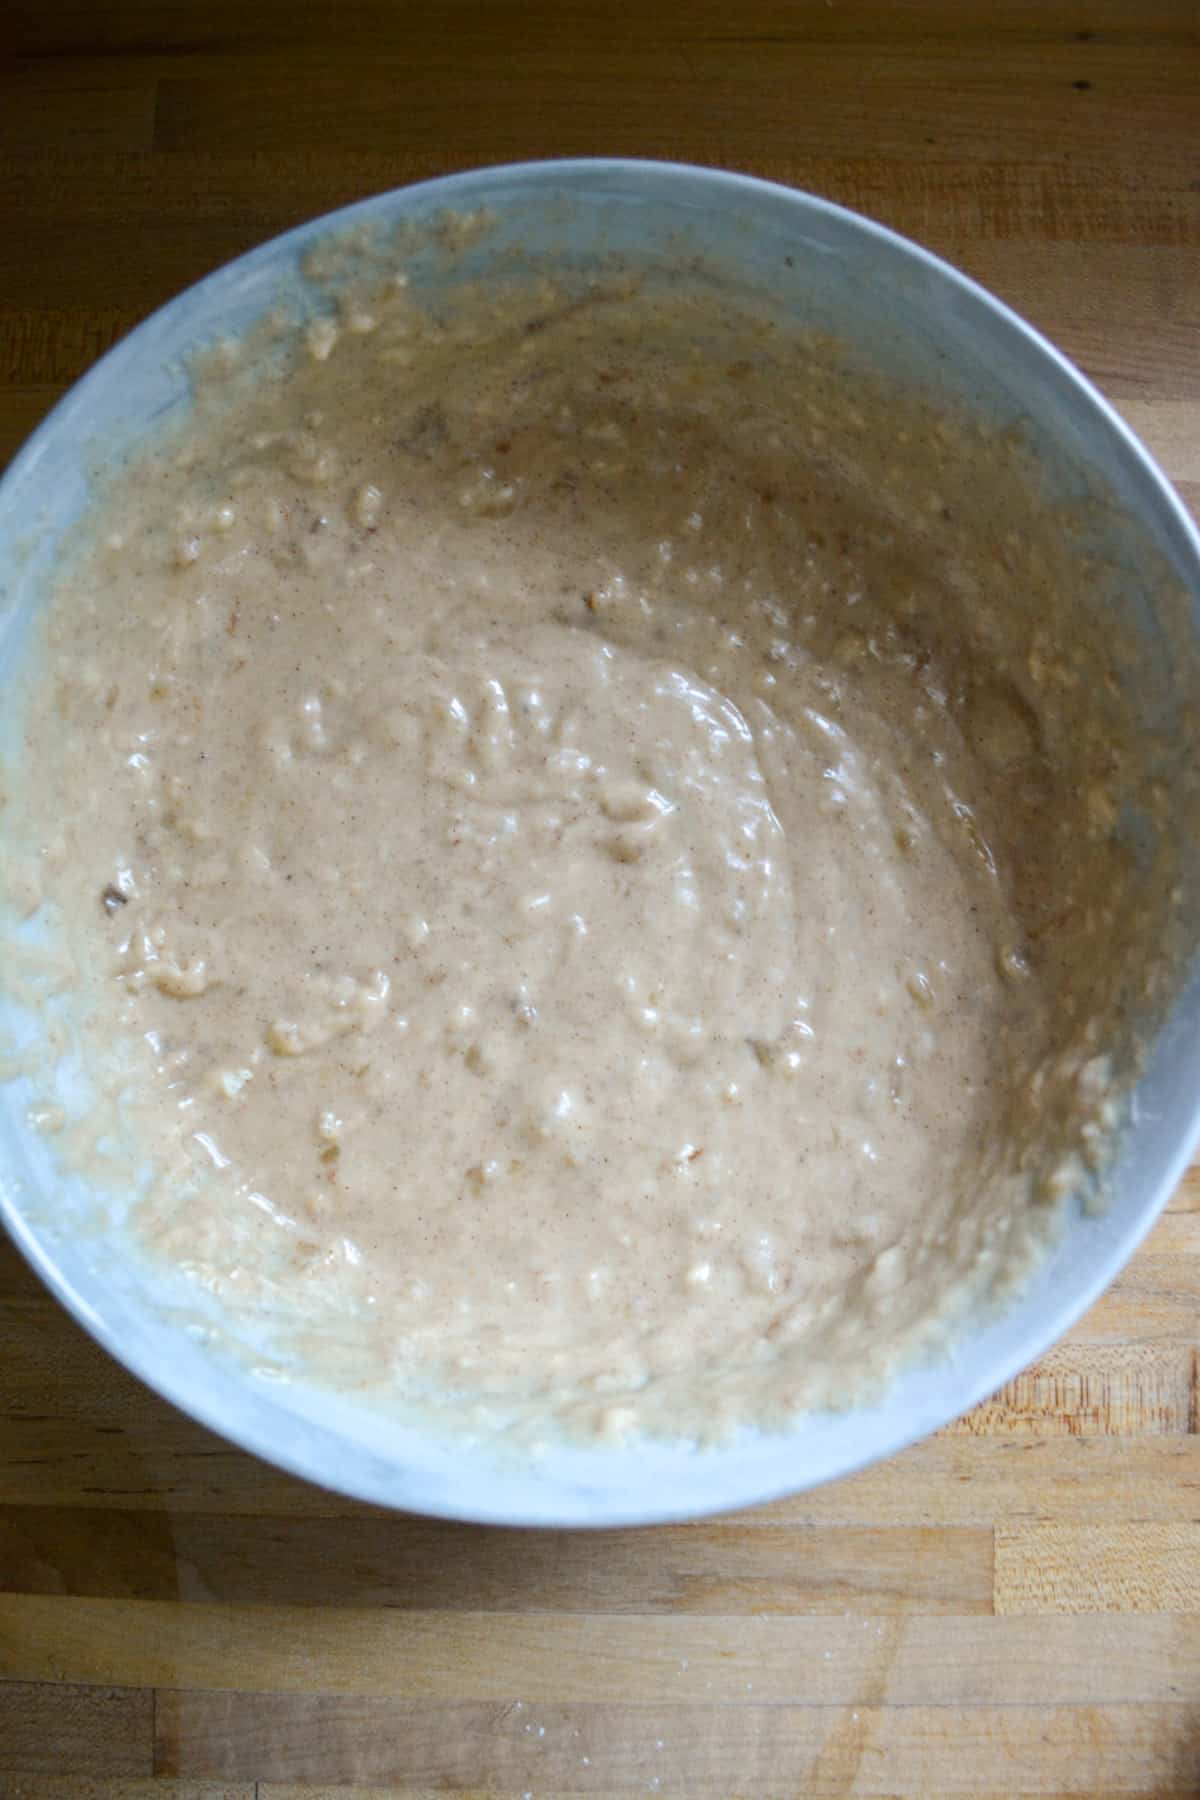 Finished muffin batter in a bowl.